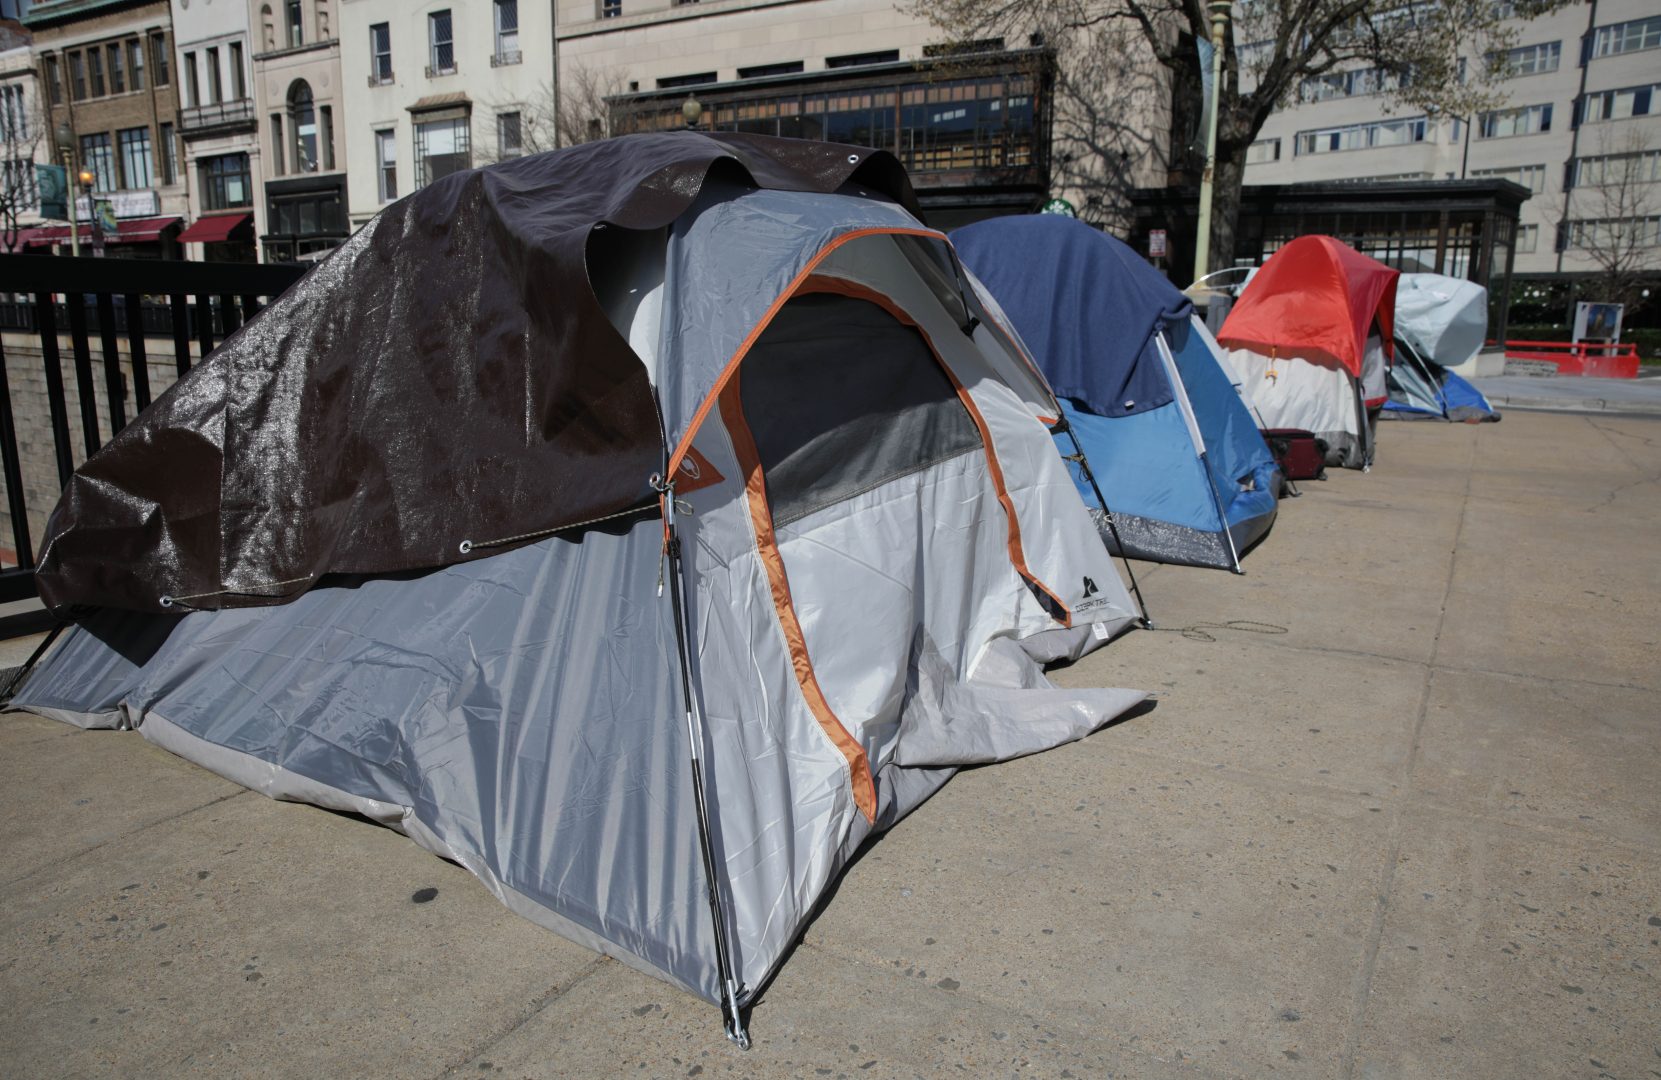 WASHINGTON, DC, USA - APRIL 05: Tents of homeless people are seen at streets in Washington, DC, United States on April 05, 2020. Homeless people continue to live their lives despite the new type of coronavirus (COVID-19) pandemic. (Photo by Yasin Ozturk/Anadolu Agency via Getty Images)